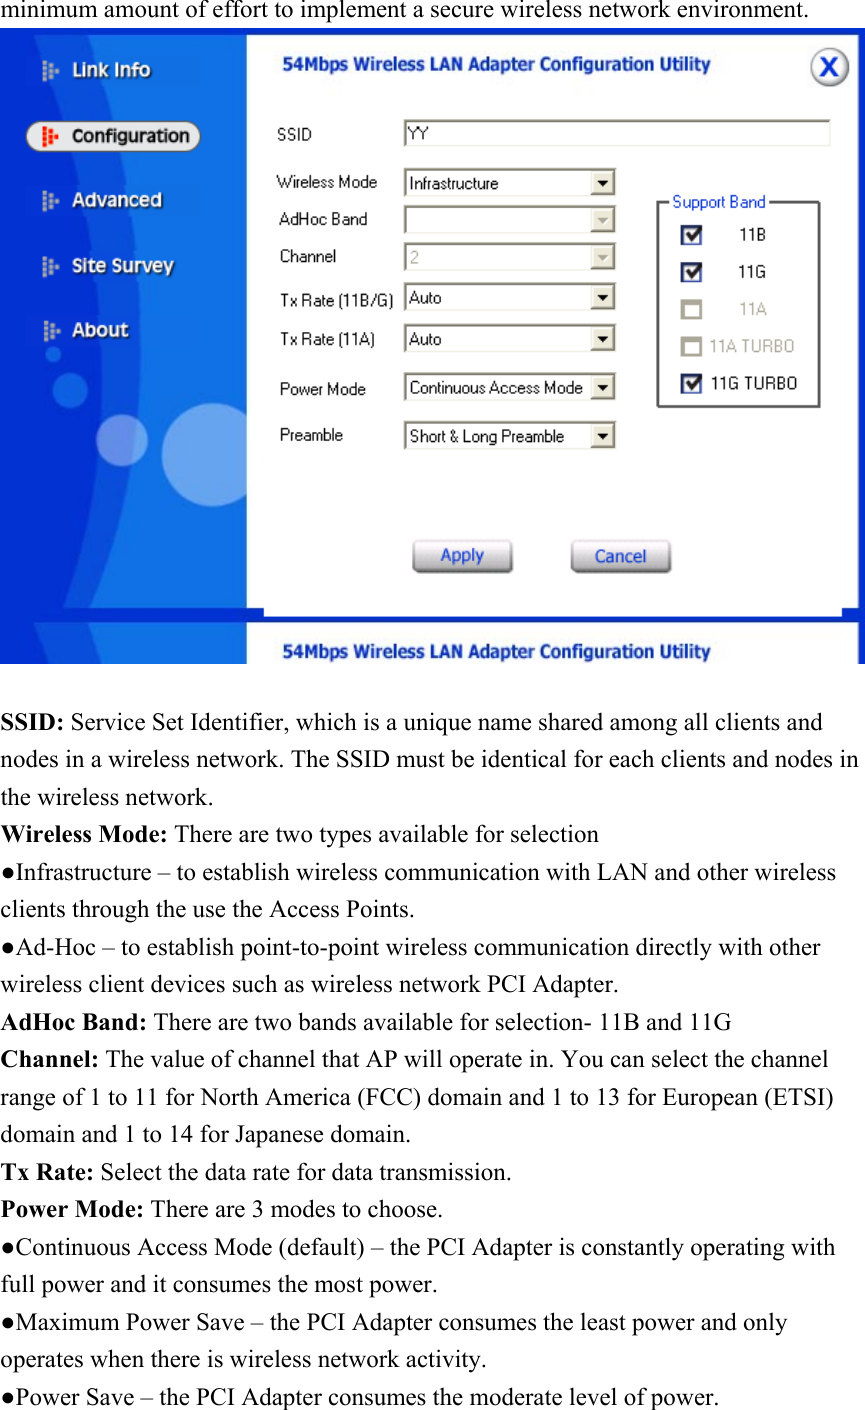 minimum amount of effort to implement a secure wireless network environment.   SSID: Service Set Identifier, which is a unique name shared among all clients and nodes in a wireless network. The SSID must be identical for each clients and nodes in the wireless network. Wireless Mode: There are two types available for selection ●Infrastructure – to establish wireless communication with LAN and other wireless clients through the use the Access Points. ●Ad-Hoc – to establish point-to-point wireless communication directly with other wireless client devices such as wireless network PCI Adapter. AdHoc Band: There are two bands available for selection- 11B and 11G Channel: The value of channel that AP will operate in. You can select the channel range of 1 to 11 for North America (FCC) domain and 1 to 13 for European (ETSI) domain and 1 to 14 for Japanese domain. Tx Rate: Select the data rate for data transmission. Power Mode: There are 3 modes to choose. ●Continuous Access Mode (default) – the PCI Adapter is constantly operating with full power and it consumes the most power. ●Maximum Power Save – the PCI Adapter consumes the least power and only operates when there is wireless network activity. ●Power Save – the PCI Adapter consumes the moderate level of power. 